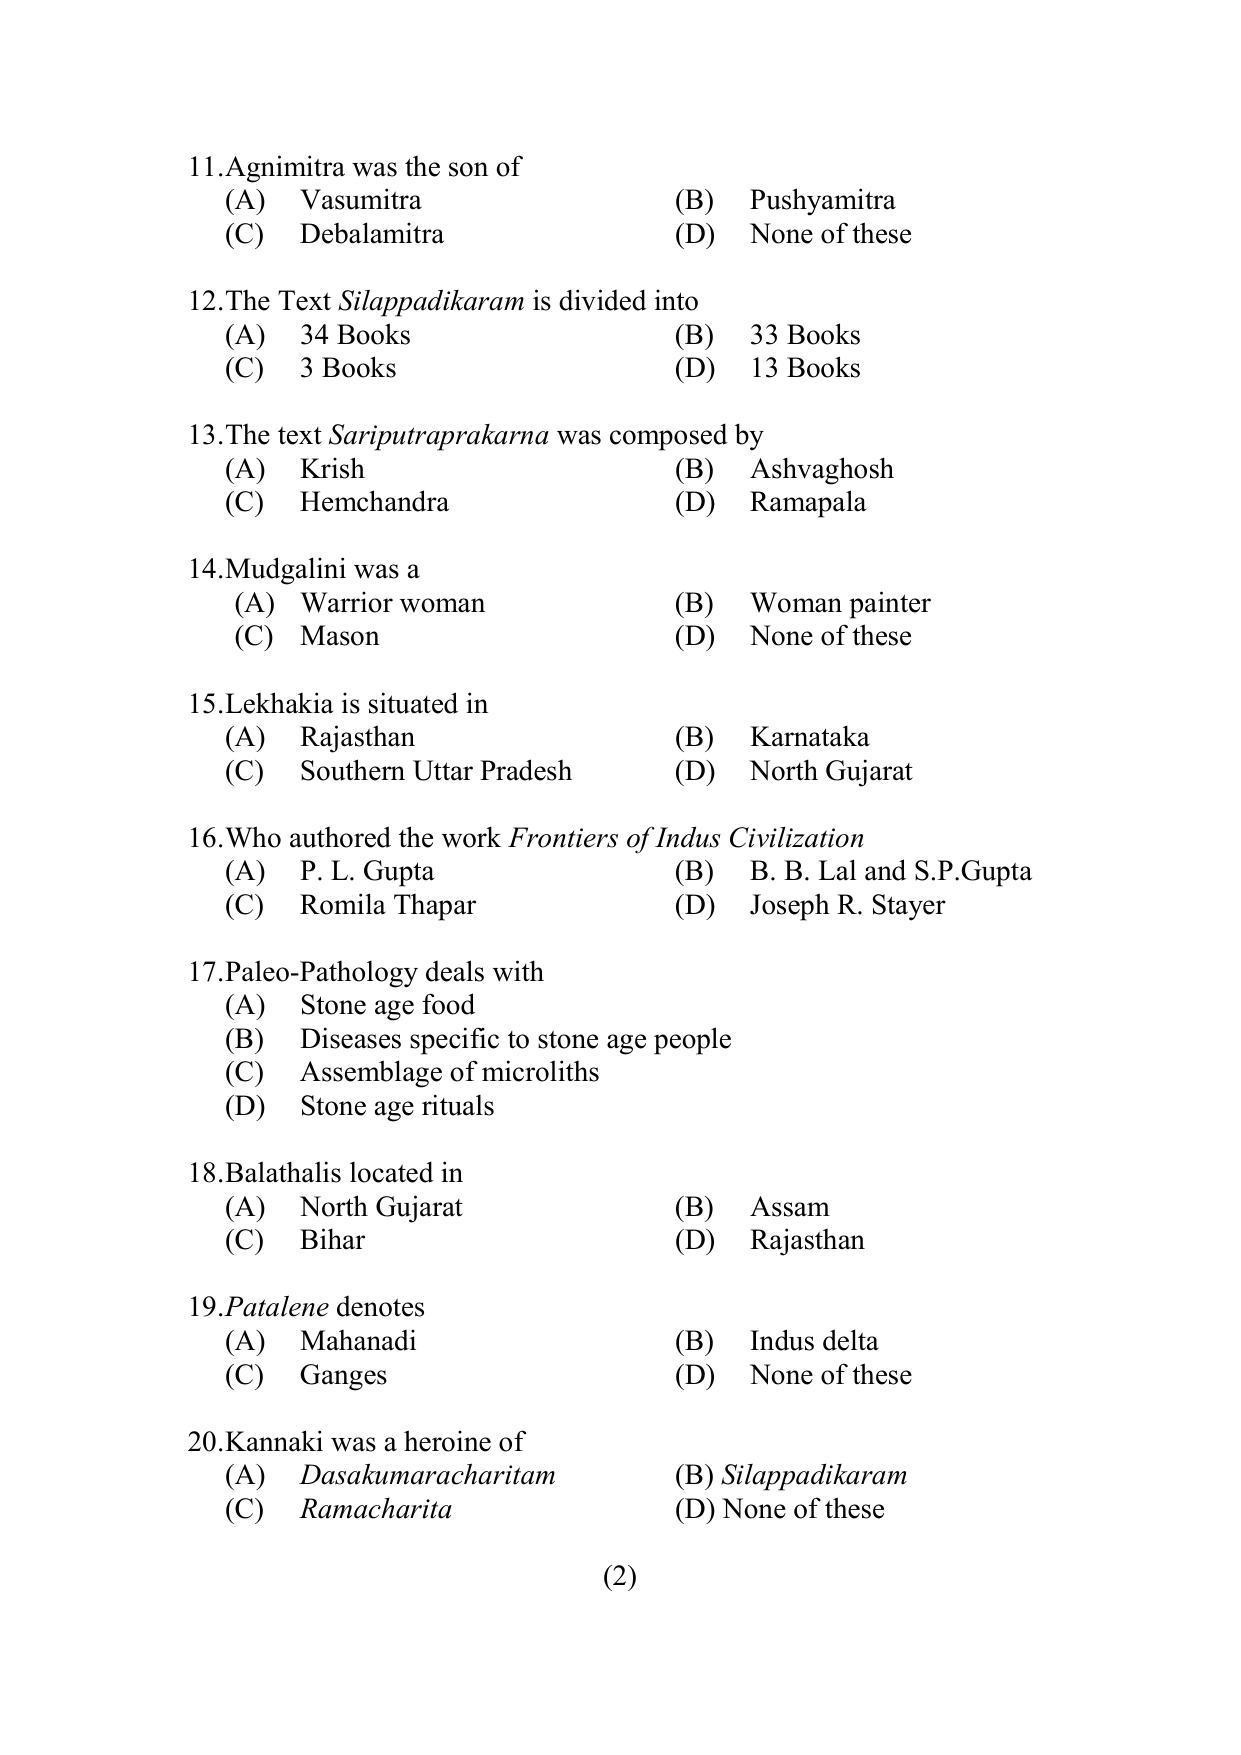 PU MPET Ancient Indian History & Archeology 2022 Question Papers - Page 2